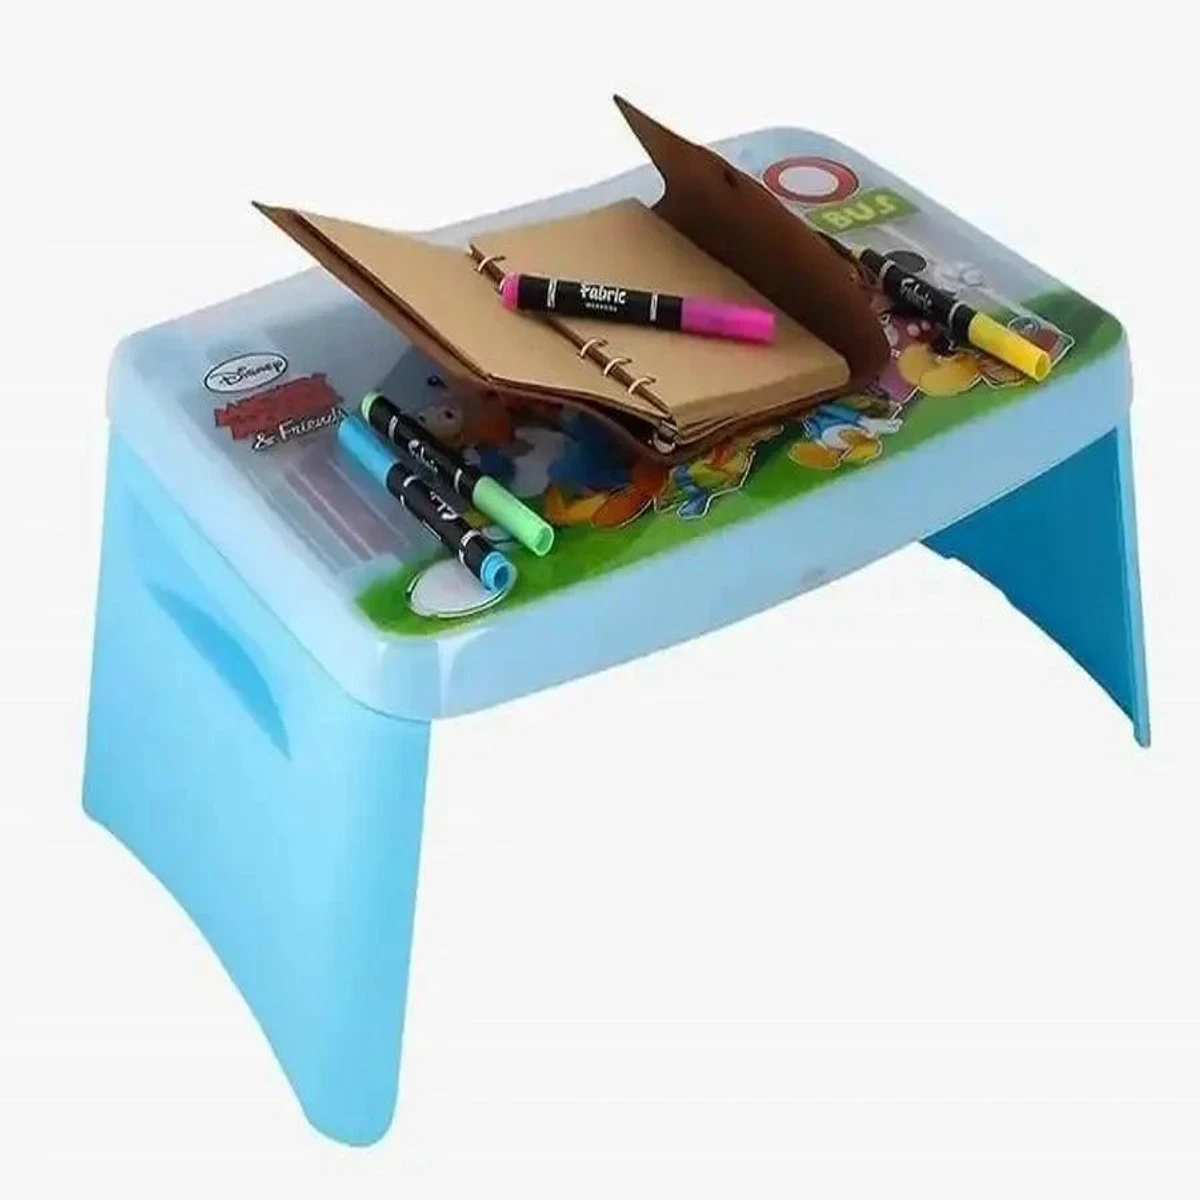 Foldable Baby Desk Table